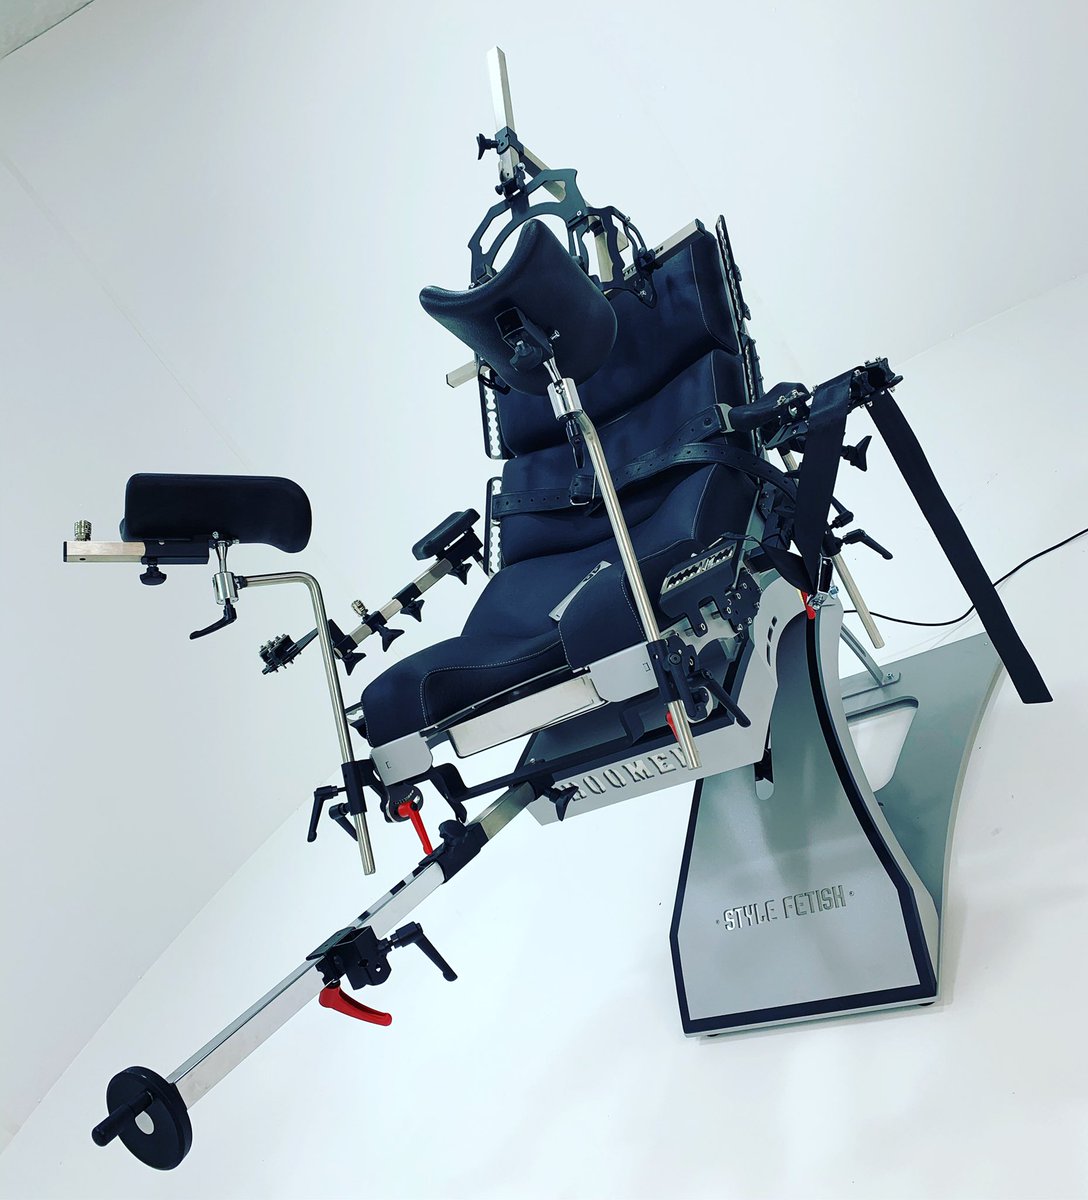 Program the control of the lifting motors individually and adapt the chair's functions perfectly to your needs. #style #stylefetish #stylefetish_industries #boomer #electric #bdsmgermany #bdsmlife #bdsmfemdom #dom #sub #gyn #chair #bdsmshop #shop #leather #black #bdsm